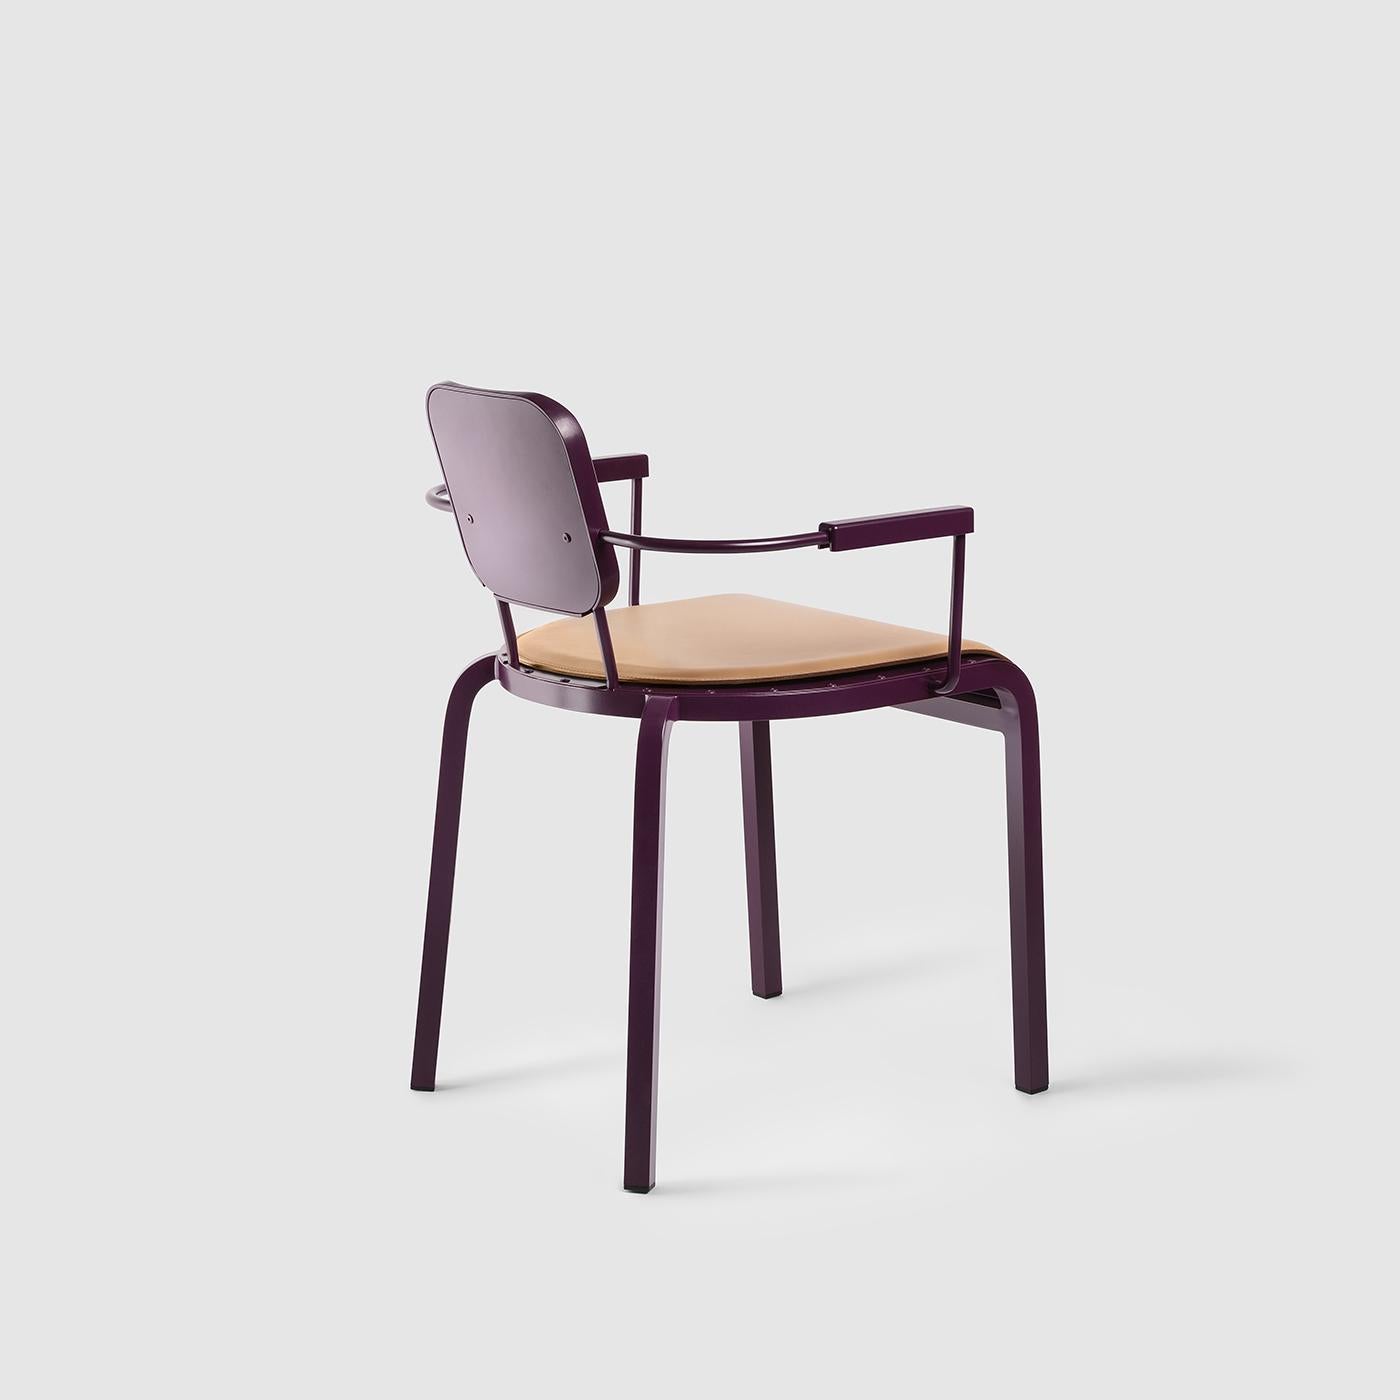 Captivating geometrical lines and a minimalist flair characterize this exquisite armchair. A statement piece of contemporary sophistication, it is entirely crafted of aluminum boasting a purple hue and is completed with a natural full-grain leather